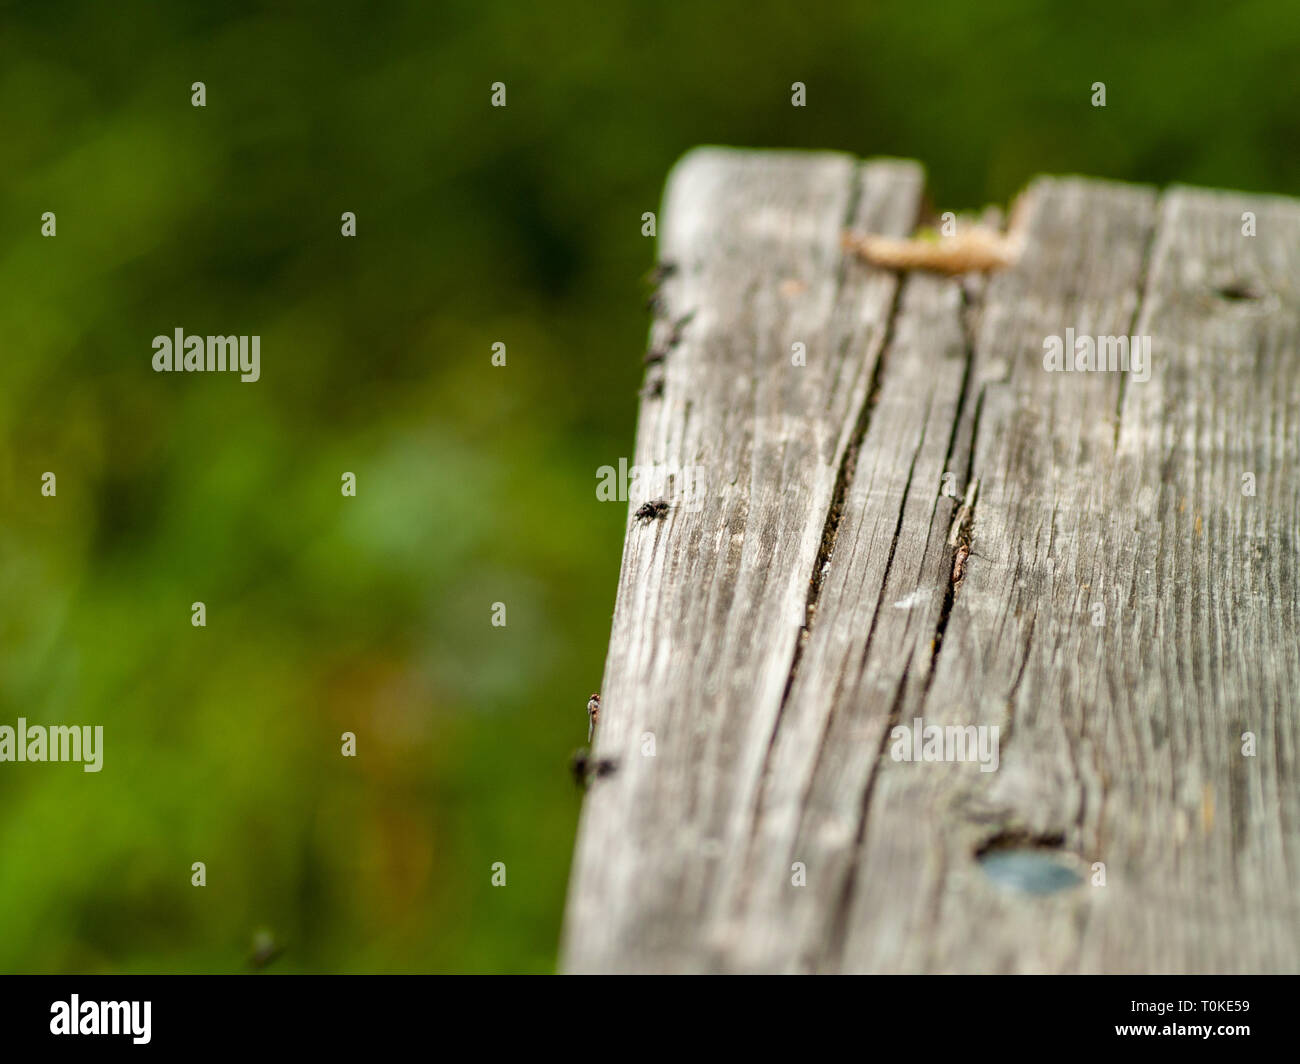 Flies perched on an old wooden board Stock Photo